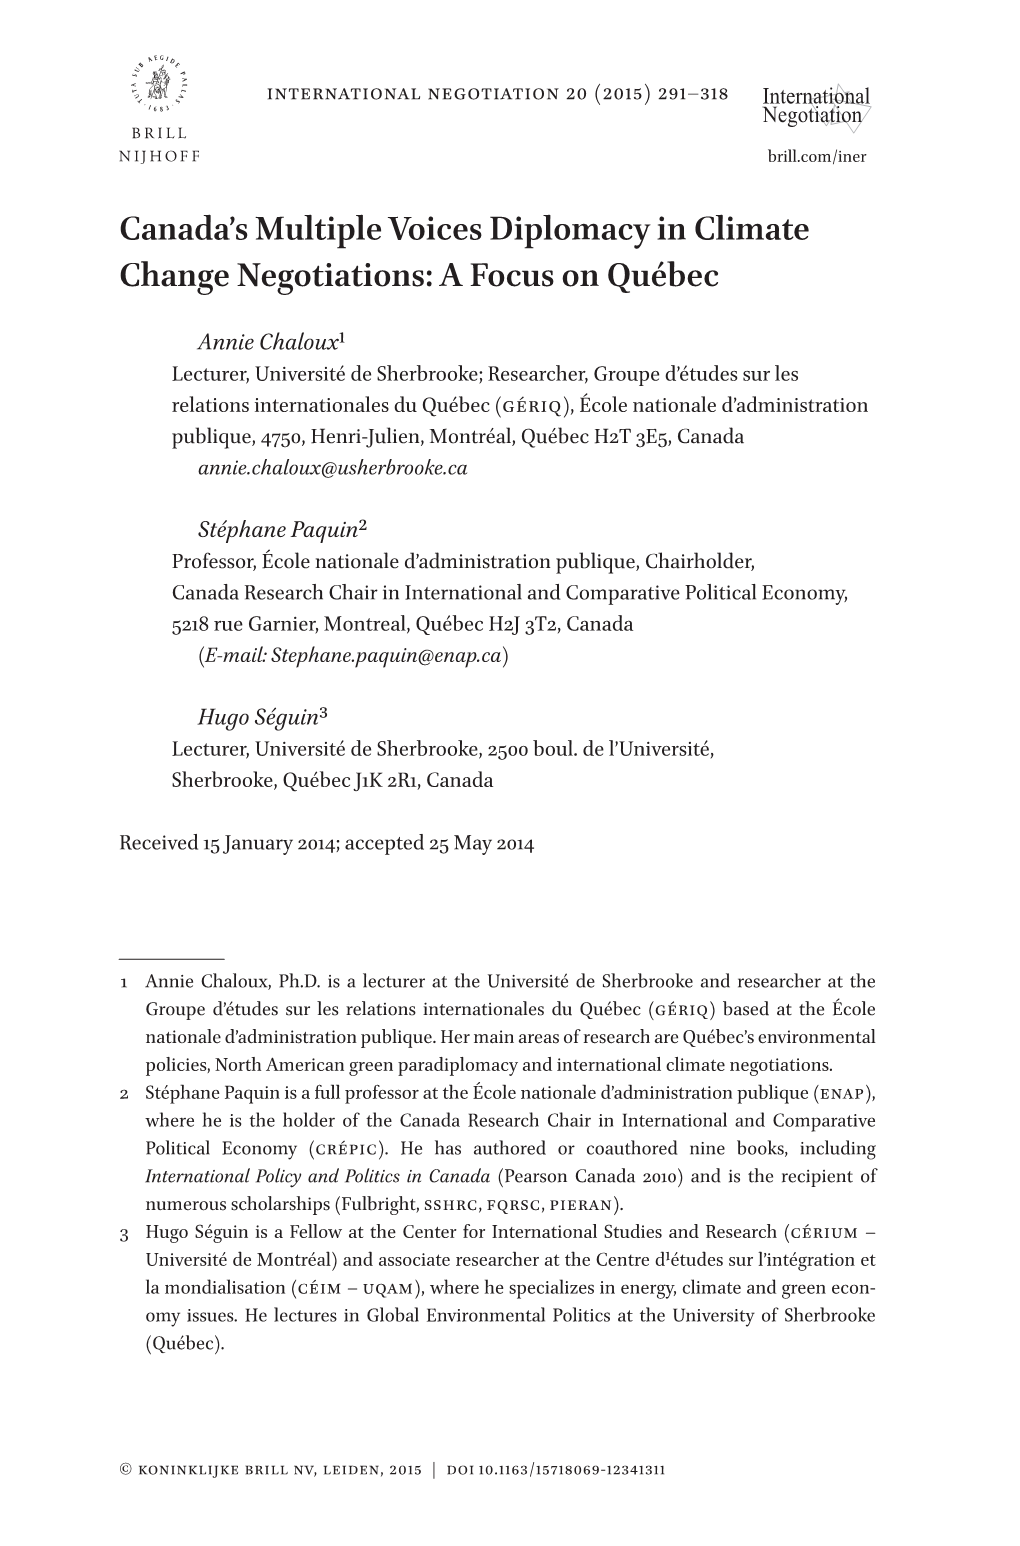 Canada's Multiple Voices Diplomacy in Climate Change Negotiations: A